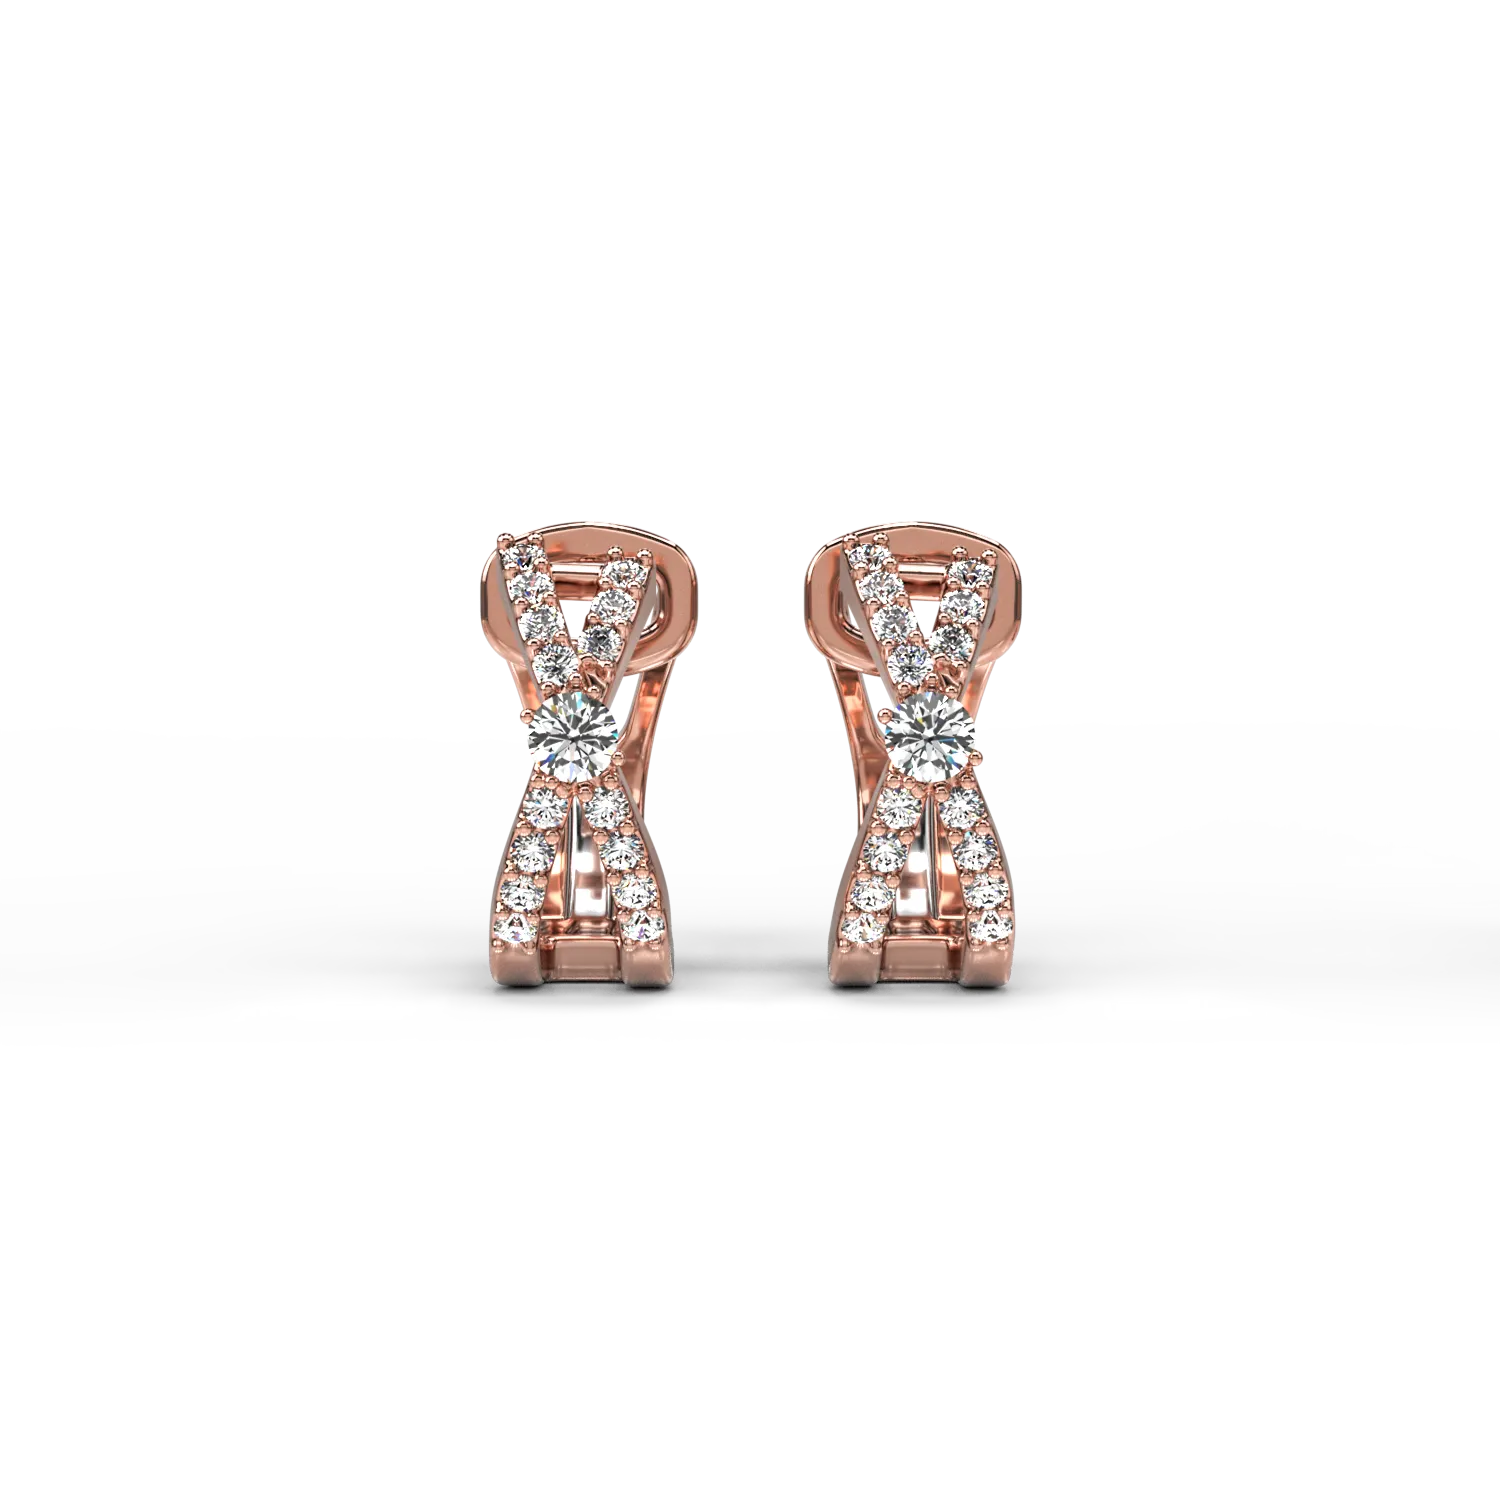 18K rose gold earrings with 0.33ct brown diamonds and 0.19ct diamonds